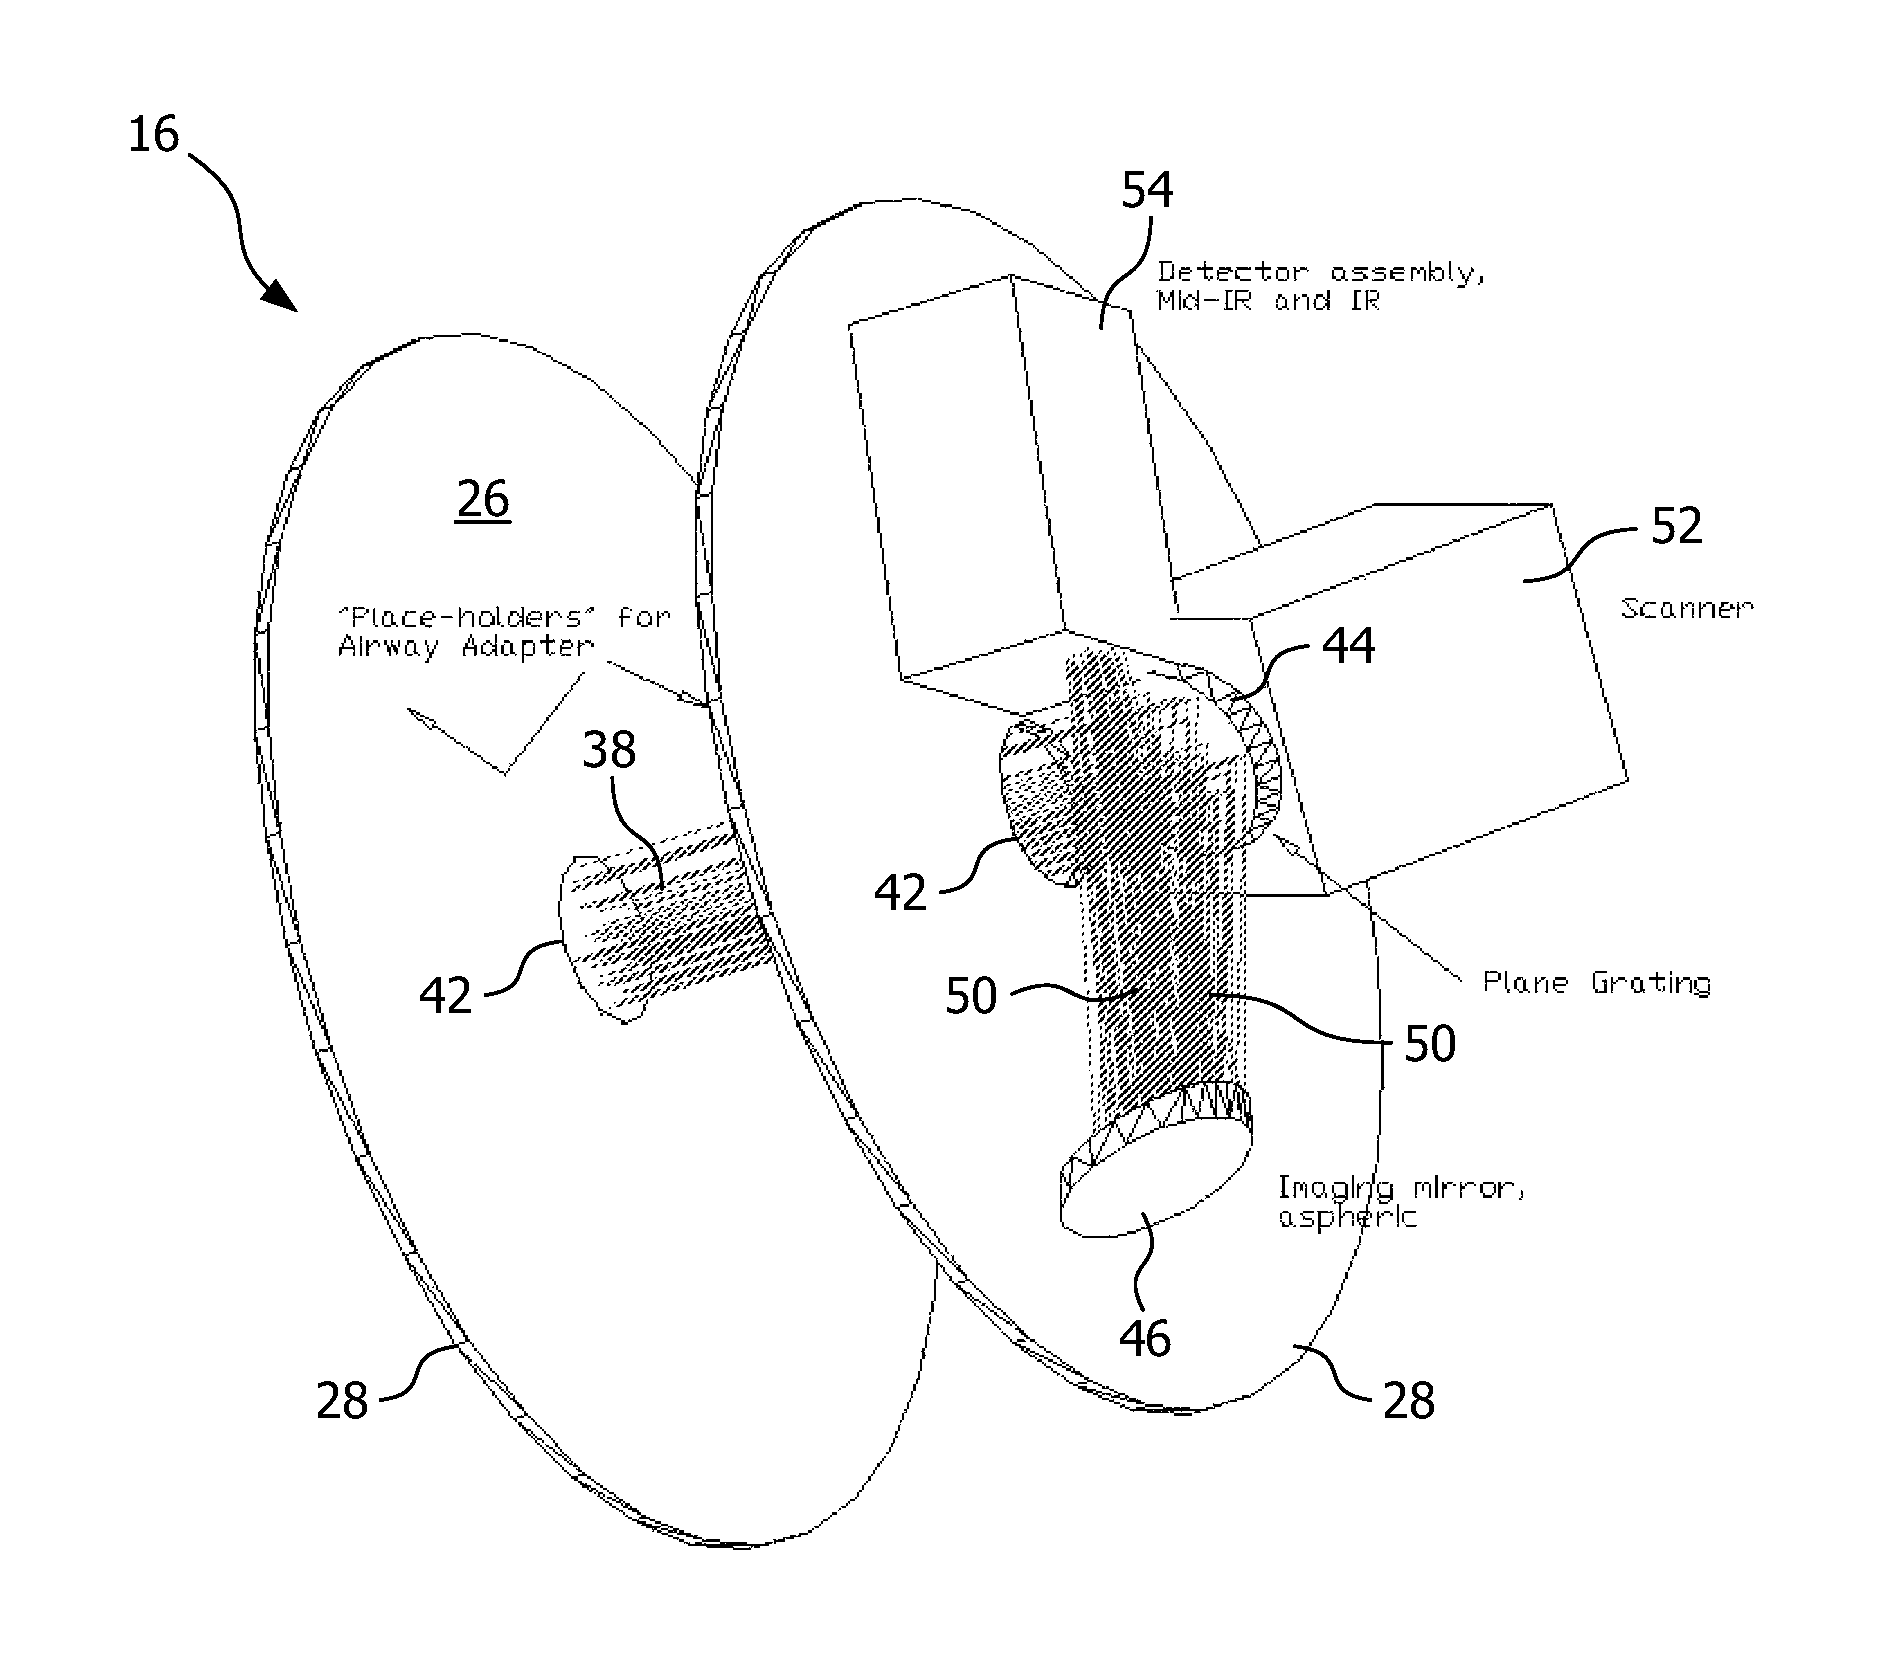 Gas measurement module for use in therapeutic settings comprising reflective scanning microspectrometer